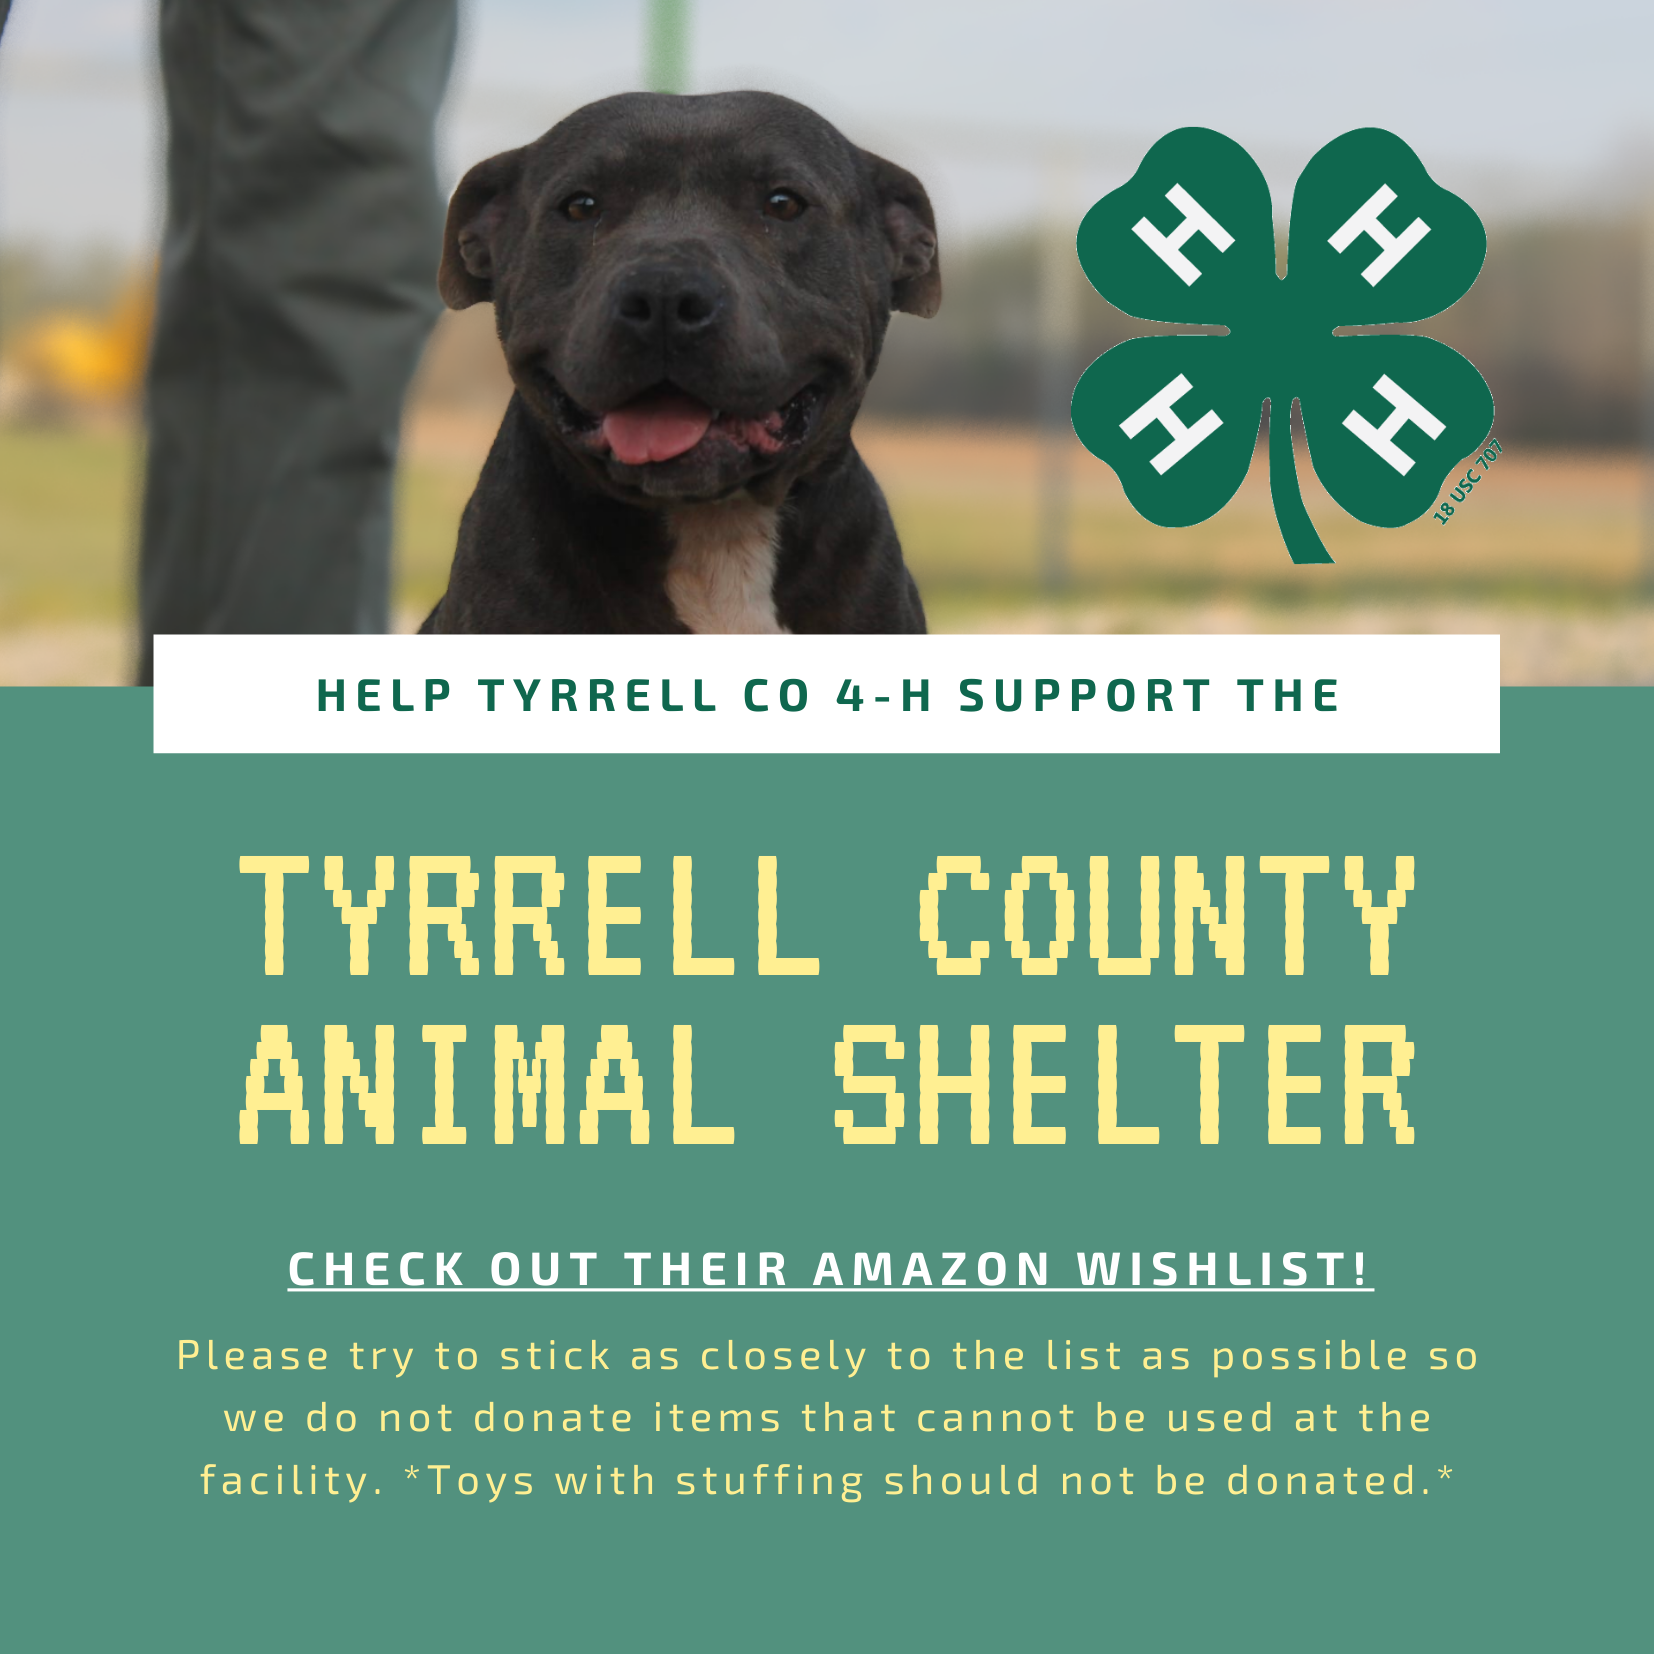 Help Tyrrell County 4-H support the Tyrrell County Animal Shelter